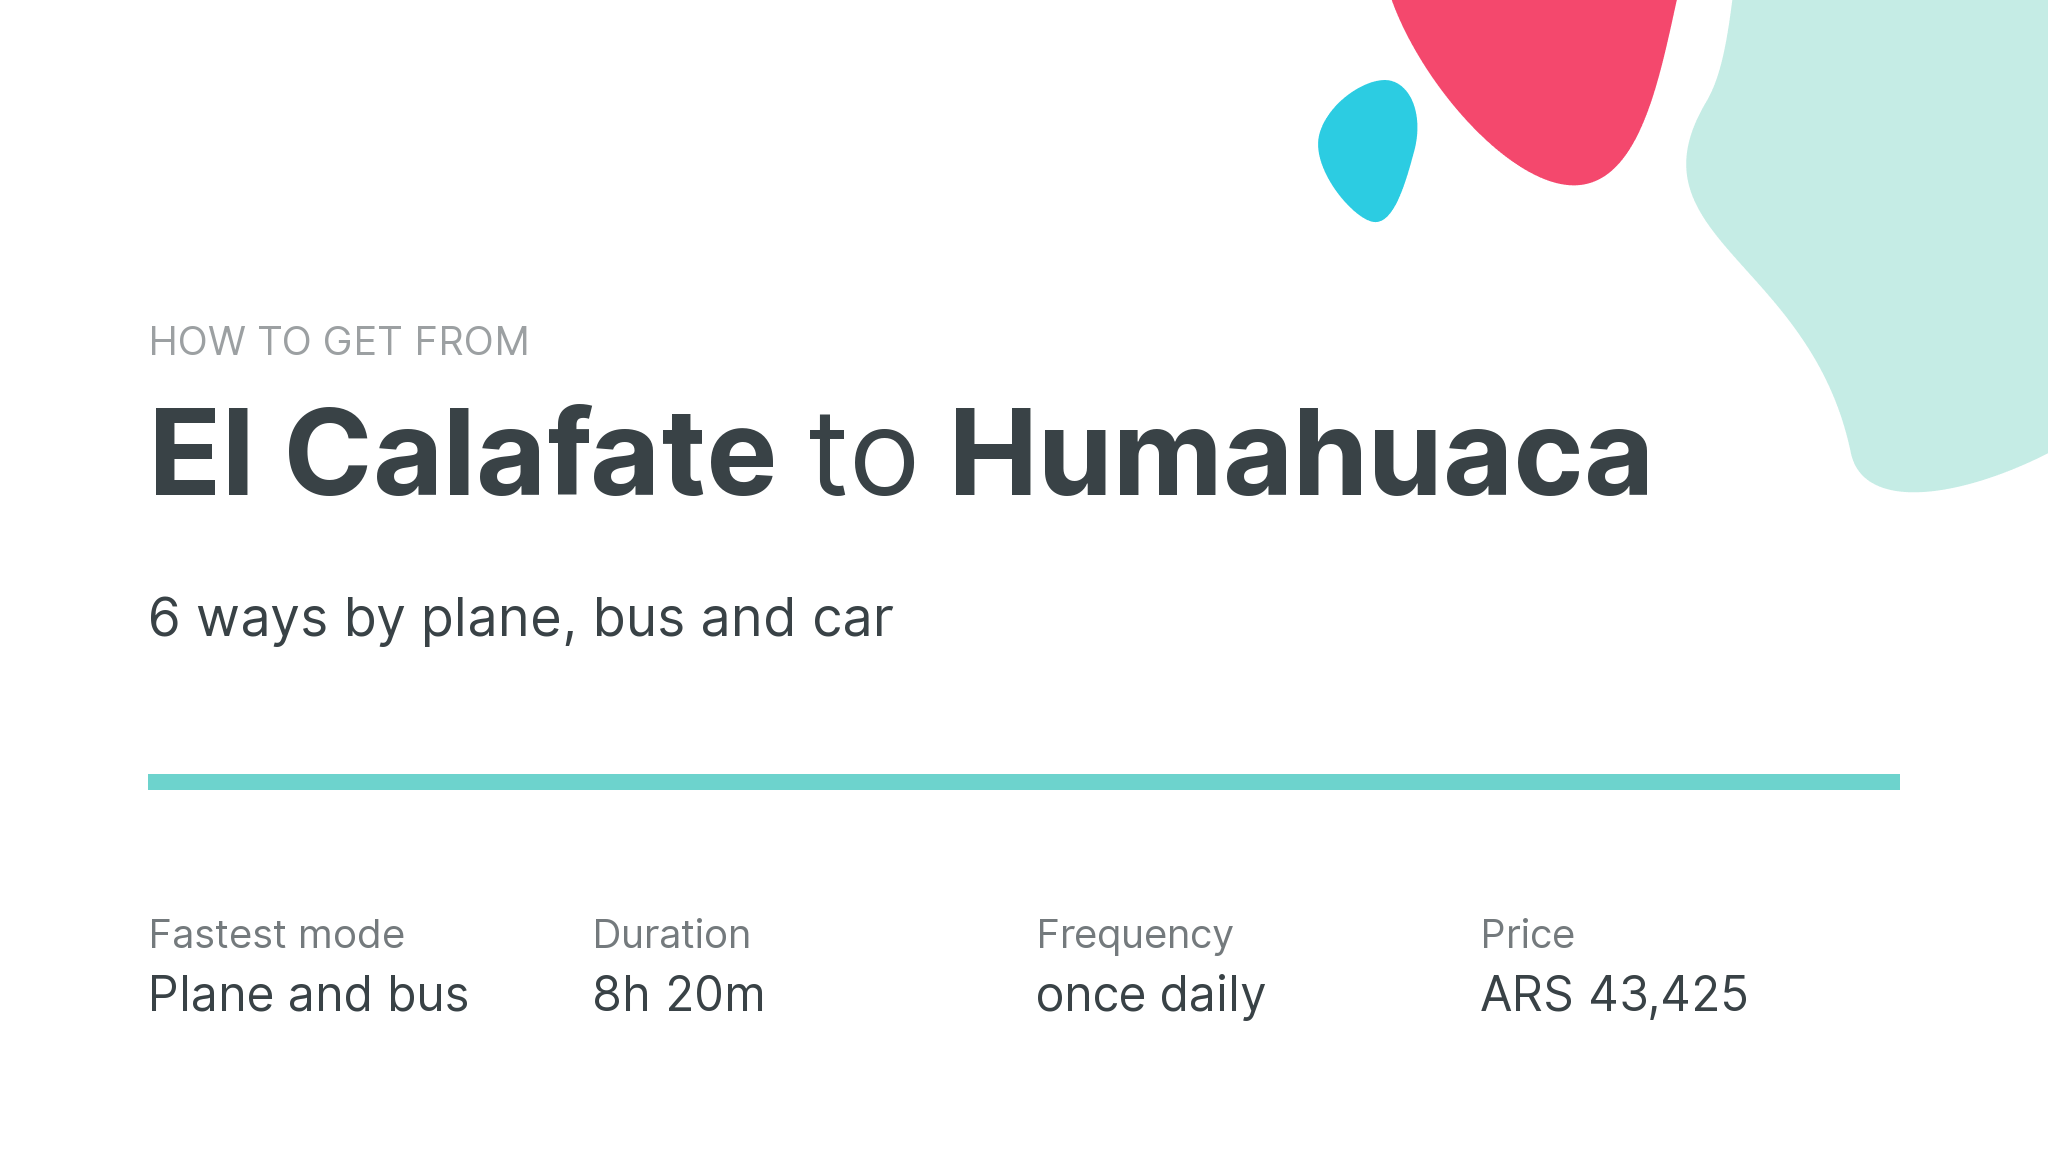 How do I get from El Calafate to Humahuaca